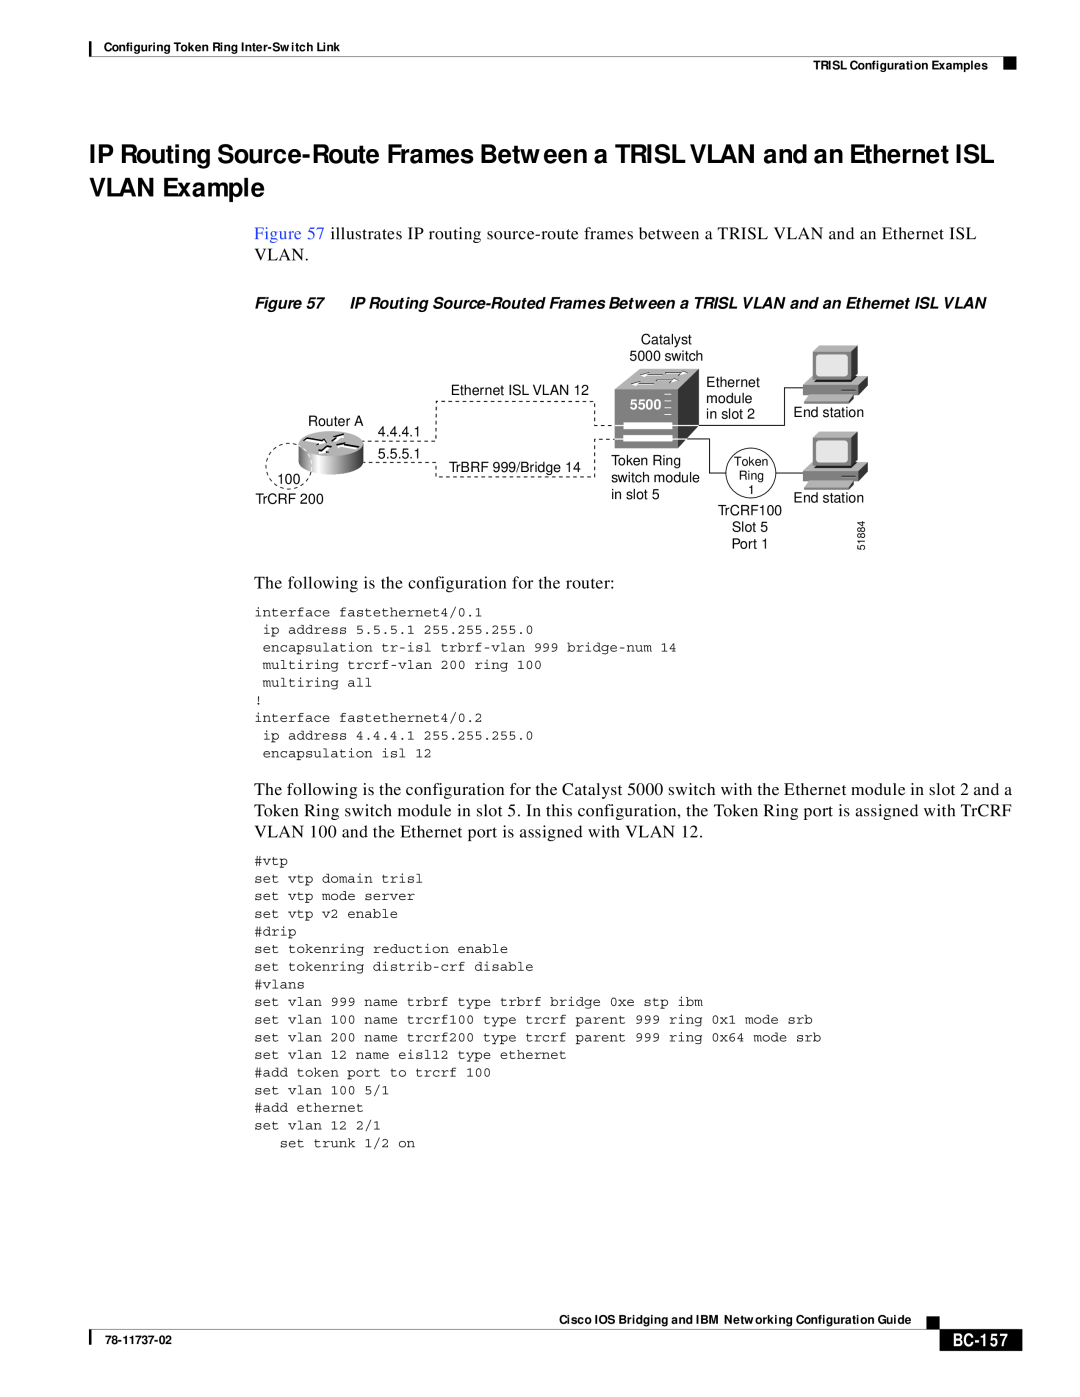 Cisco Systems BC-145 manual BC-157, switch 